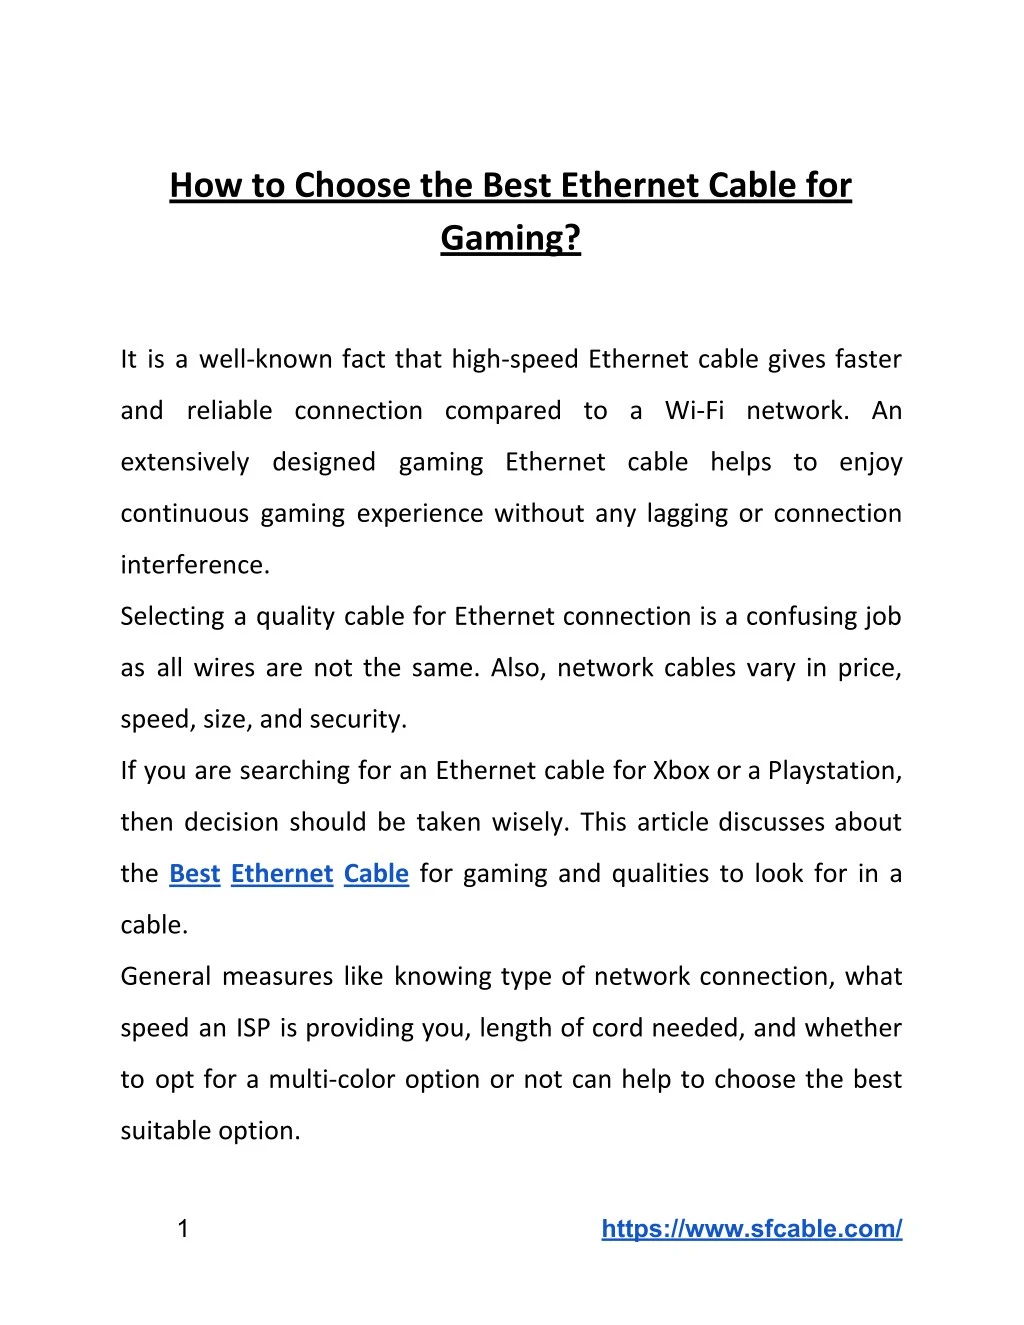 how to choose the best ethernet cable for gaming